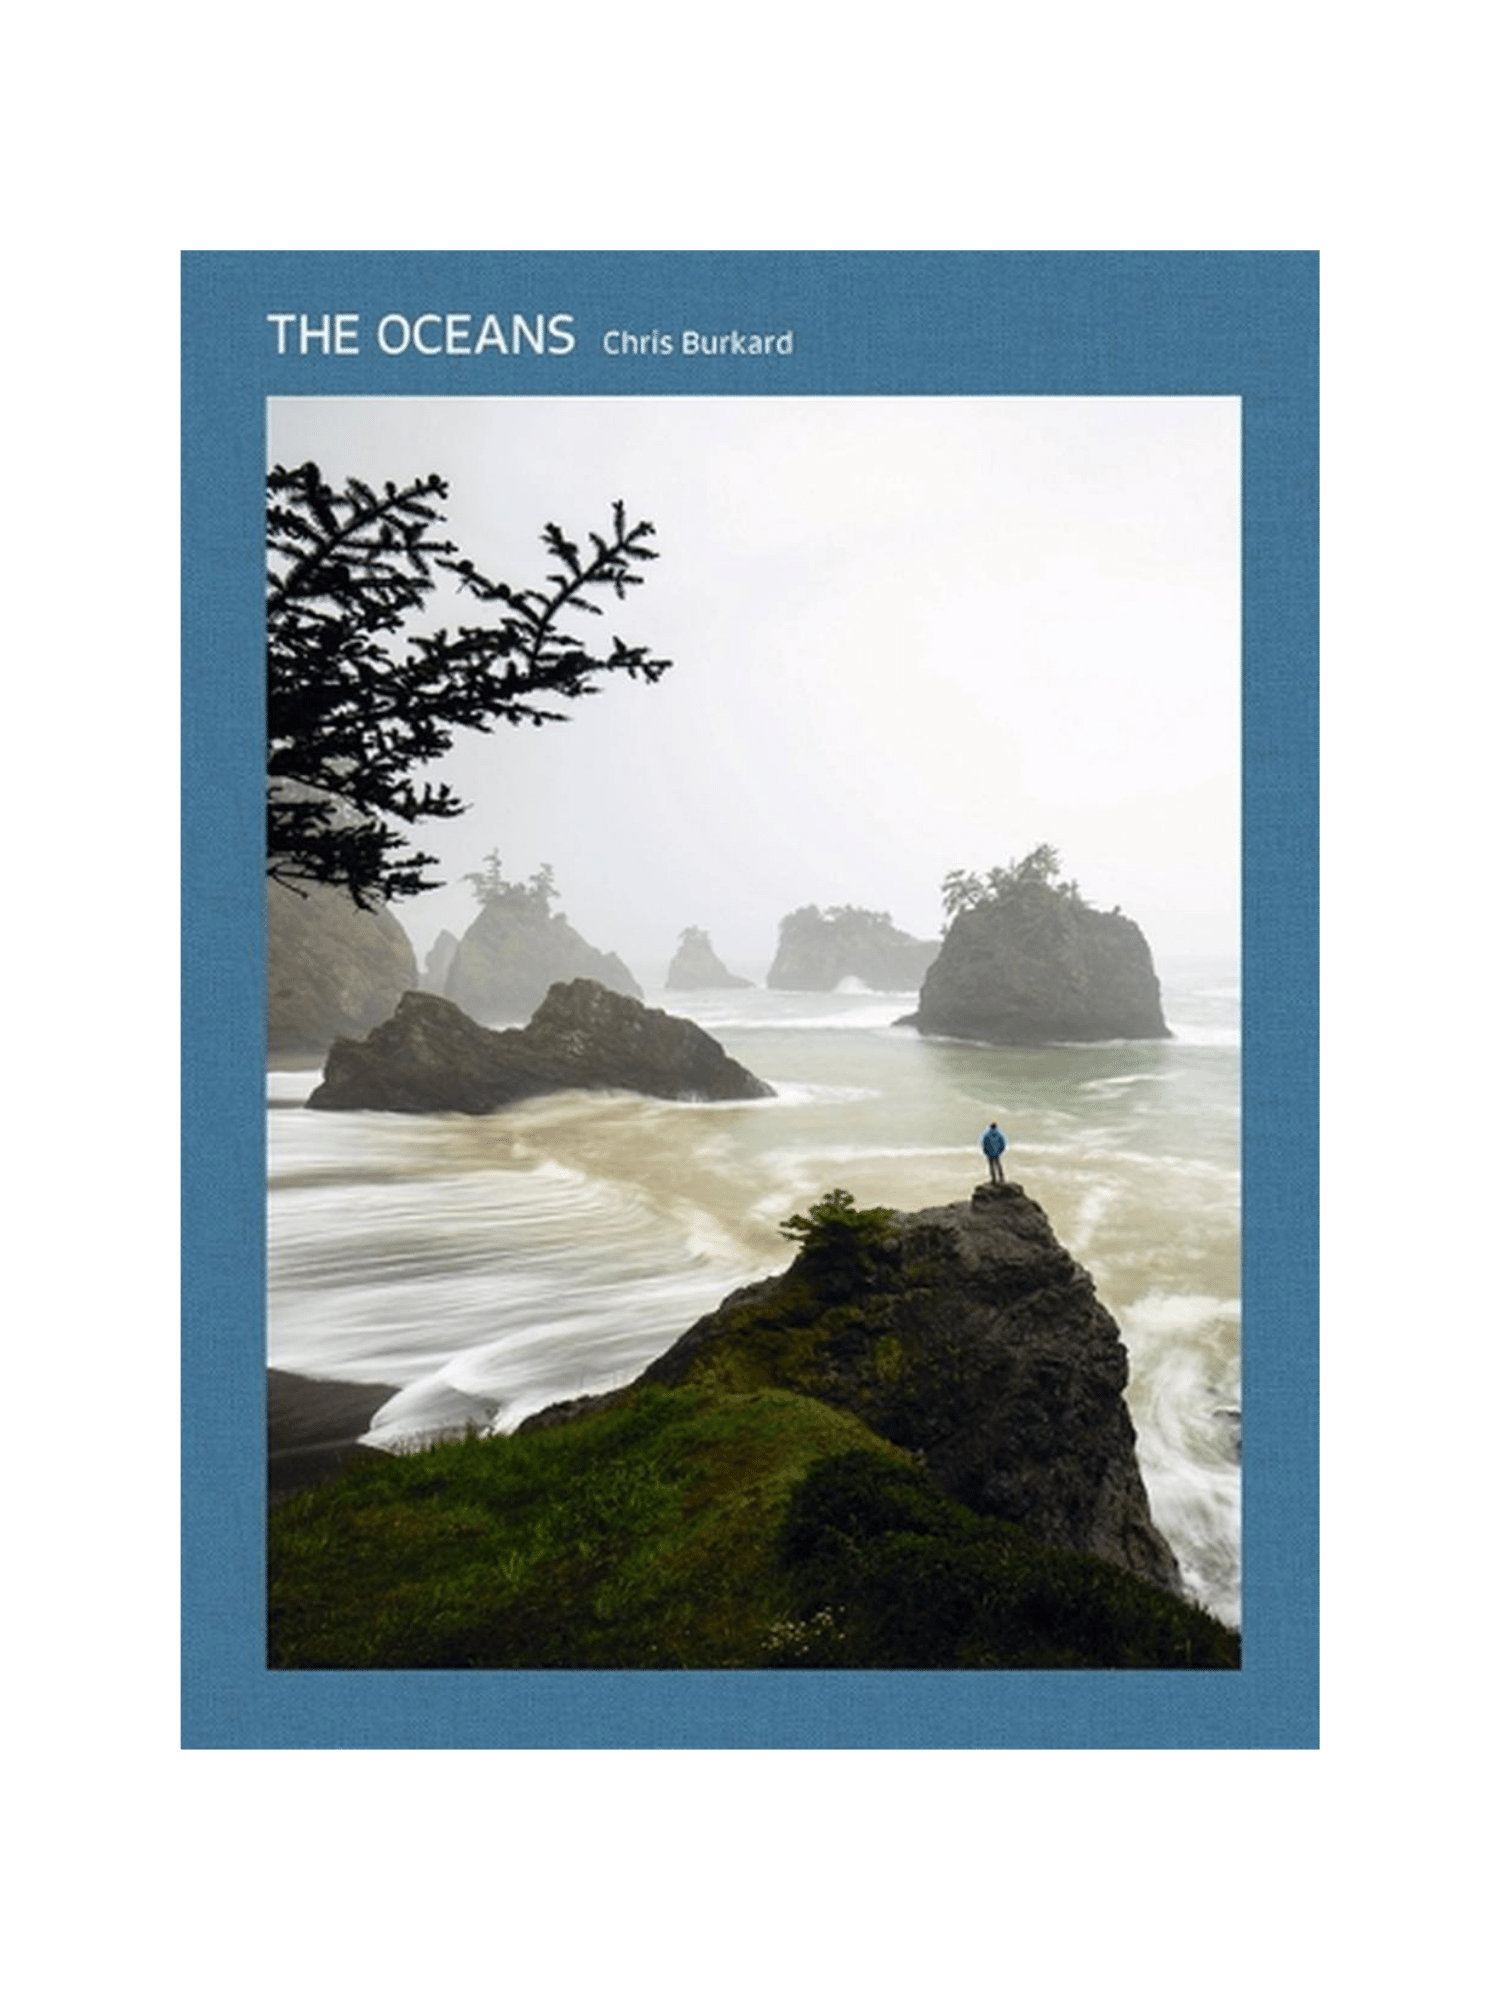 OCEANS, THE: THE MARITIME PHOTOGRAPHY OF CHRIS BURKARD